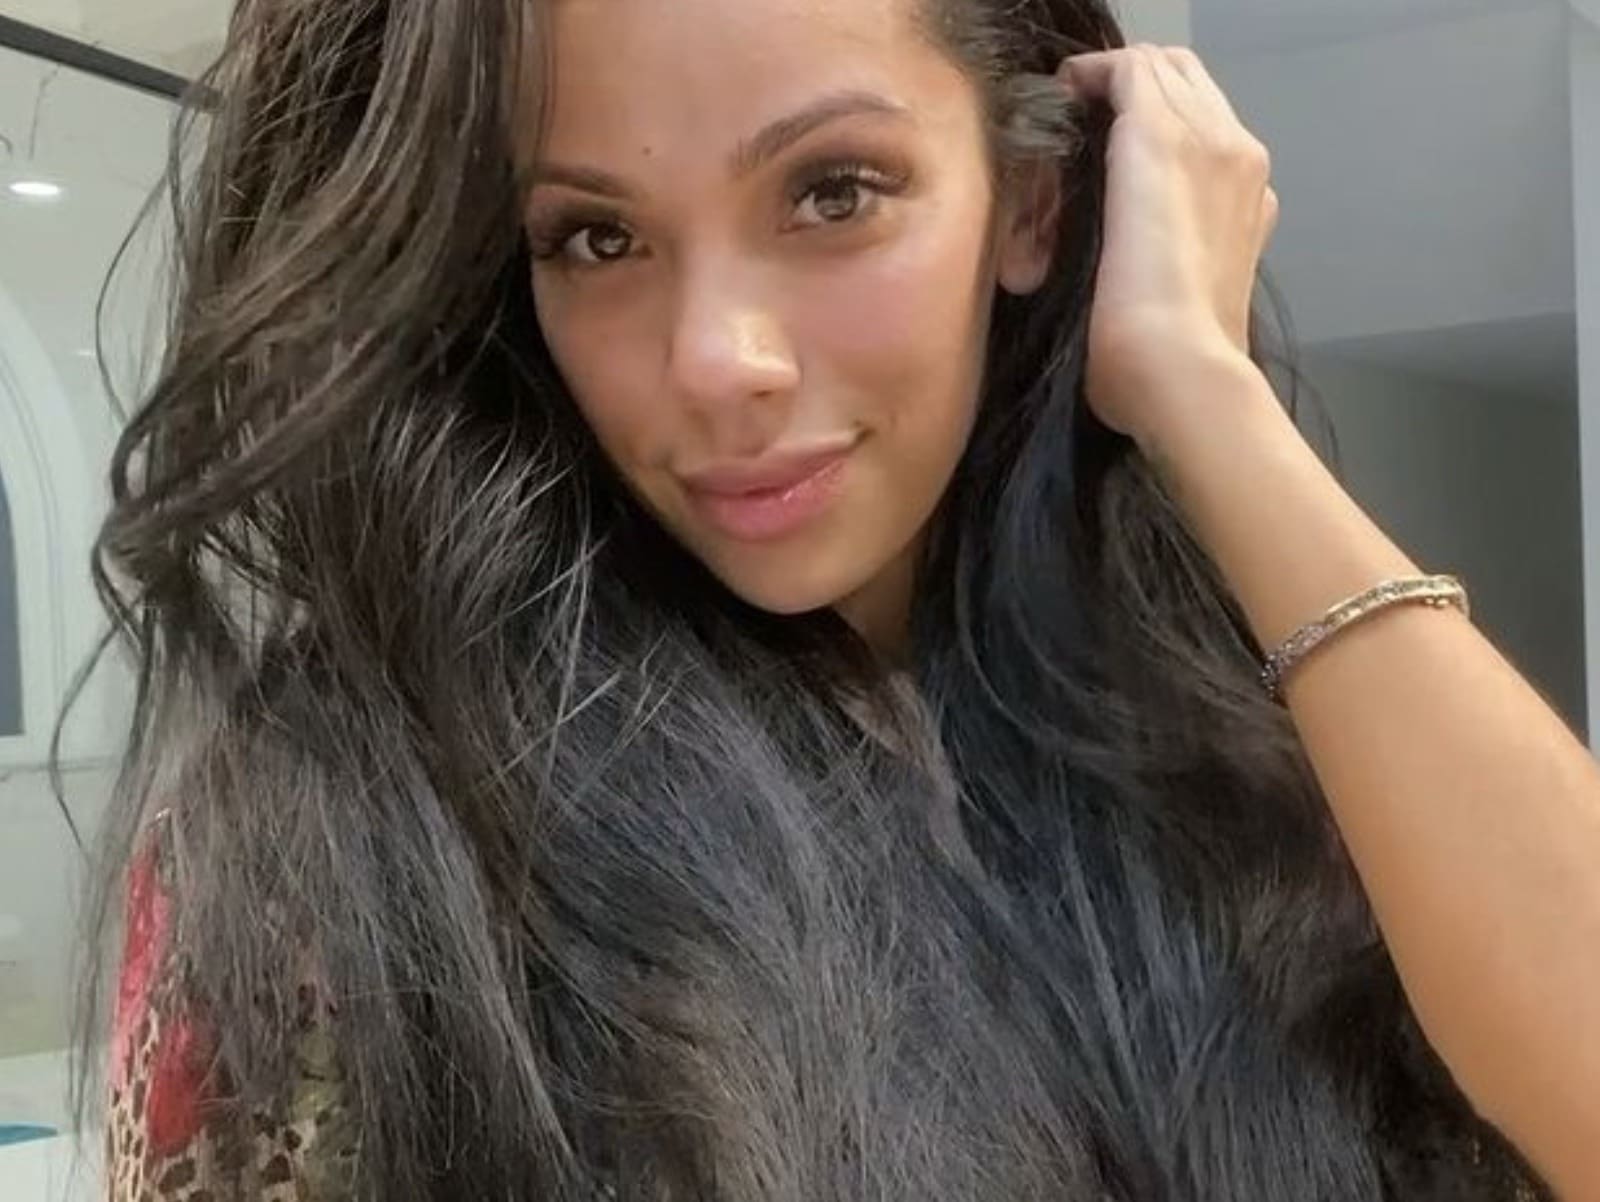 erica-mena-keeps-fans-updated-about-what-shes-doing-these-days-following-safaree-breakup